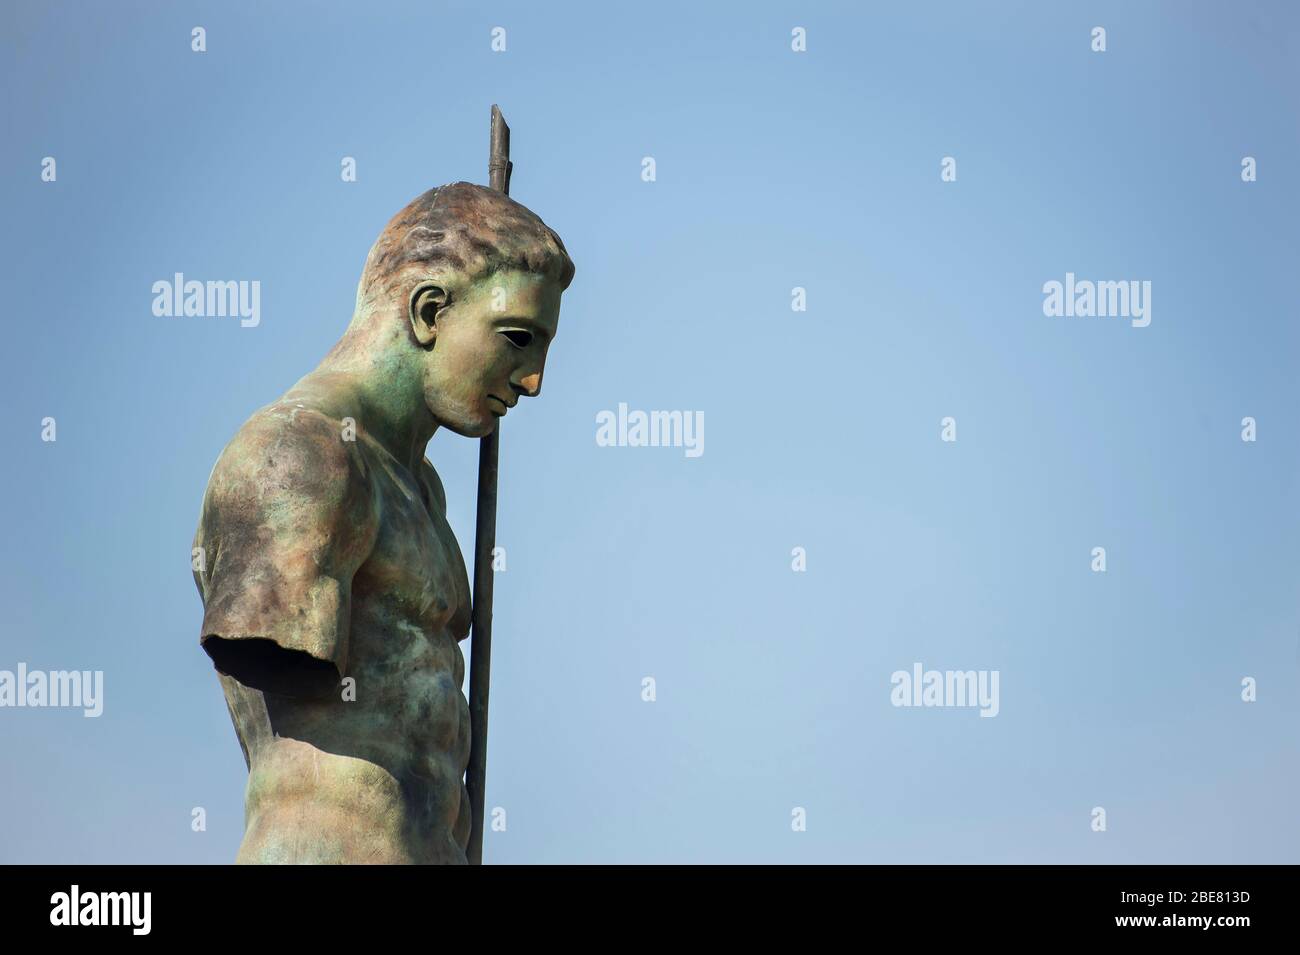 Bronze warrior statue by Igor Mitoraj during an exhibition in the ancient city of Pompeii, Italy Stock Photo